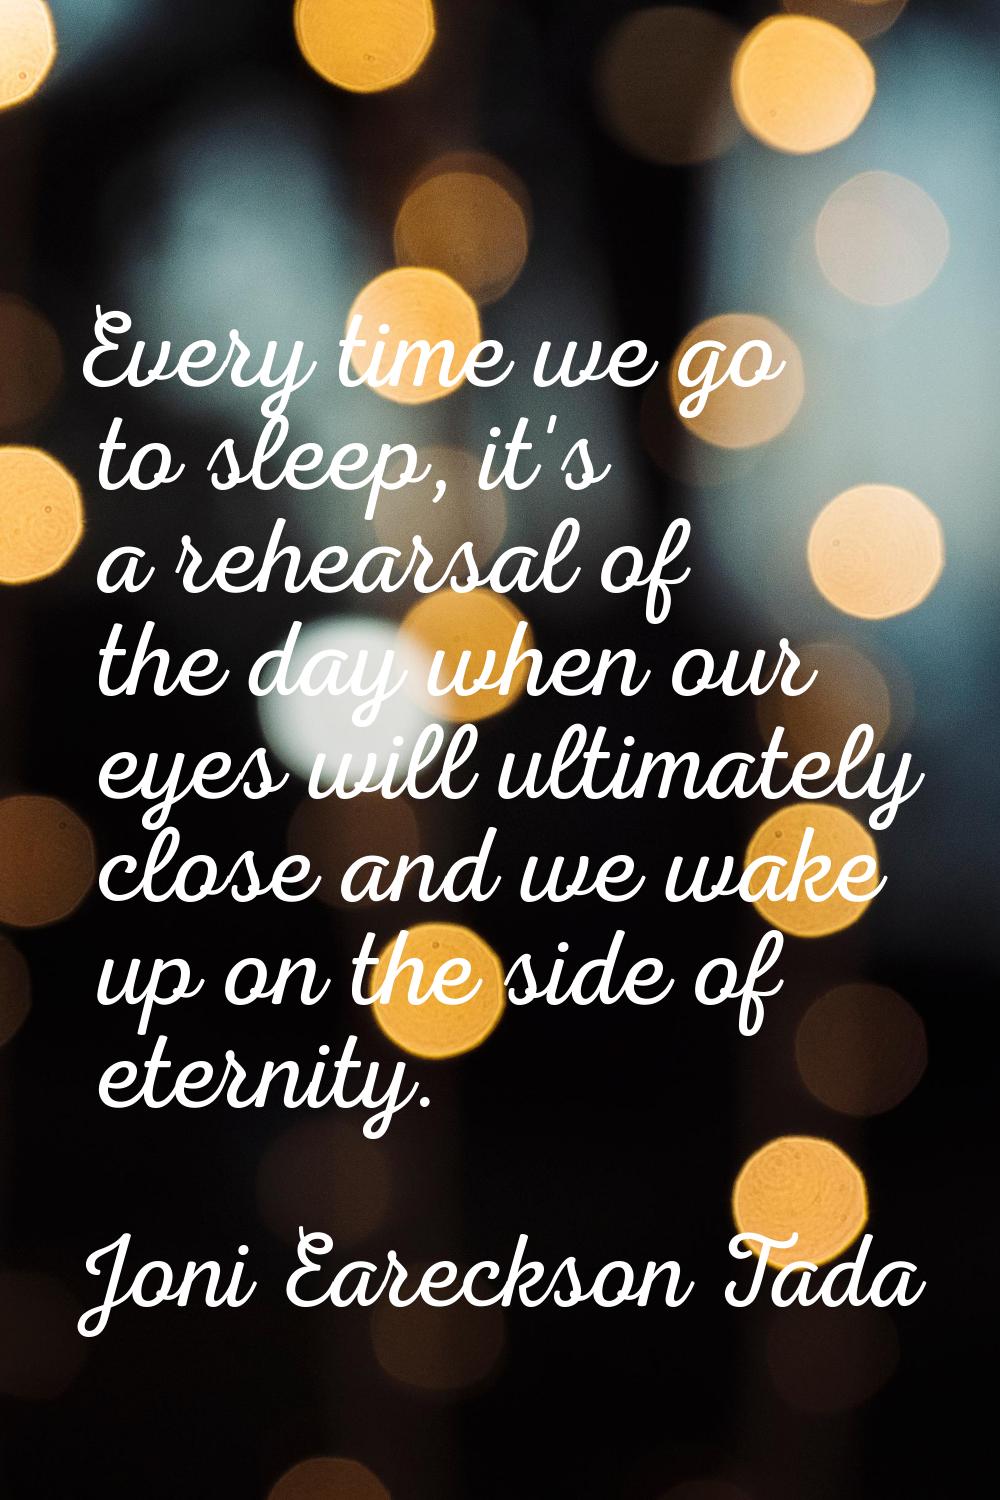 Every time we go to sleep, it's a rehearsal of the day when our eyes will ultimately close and we w